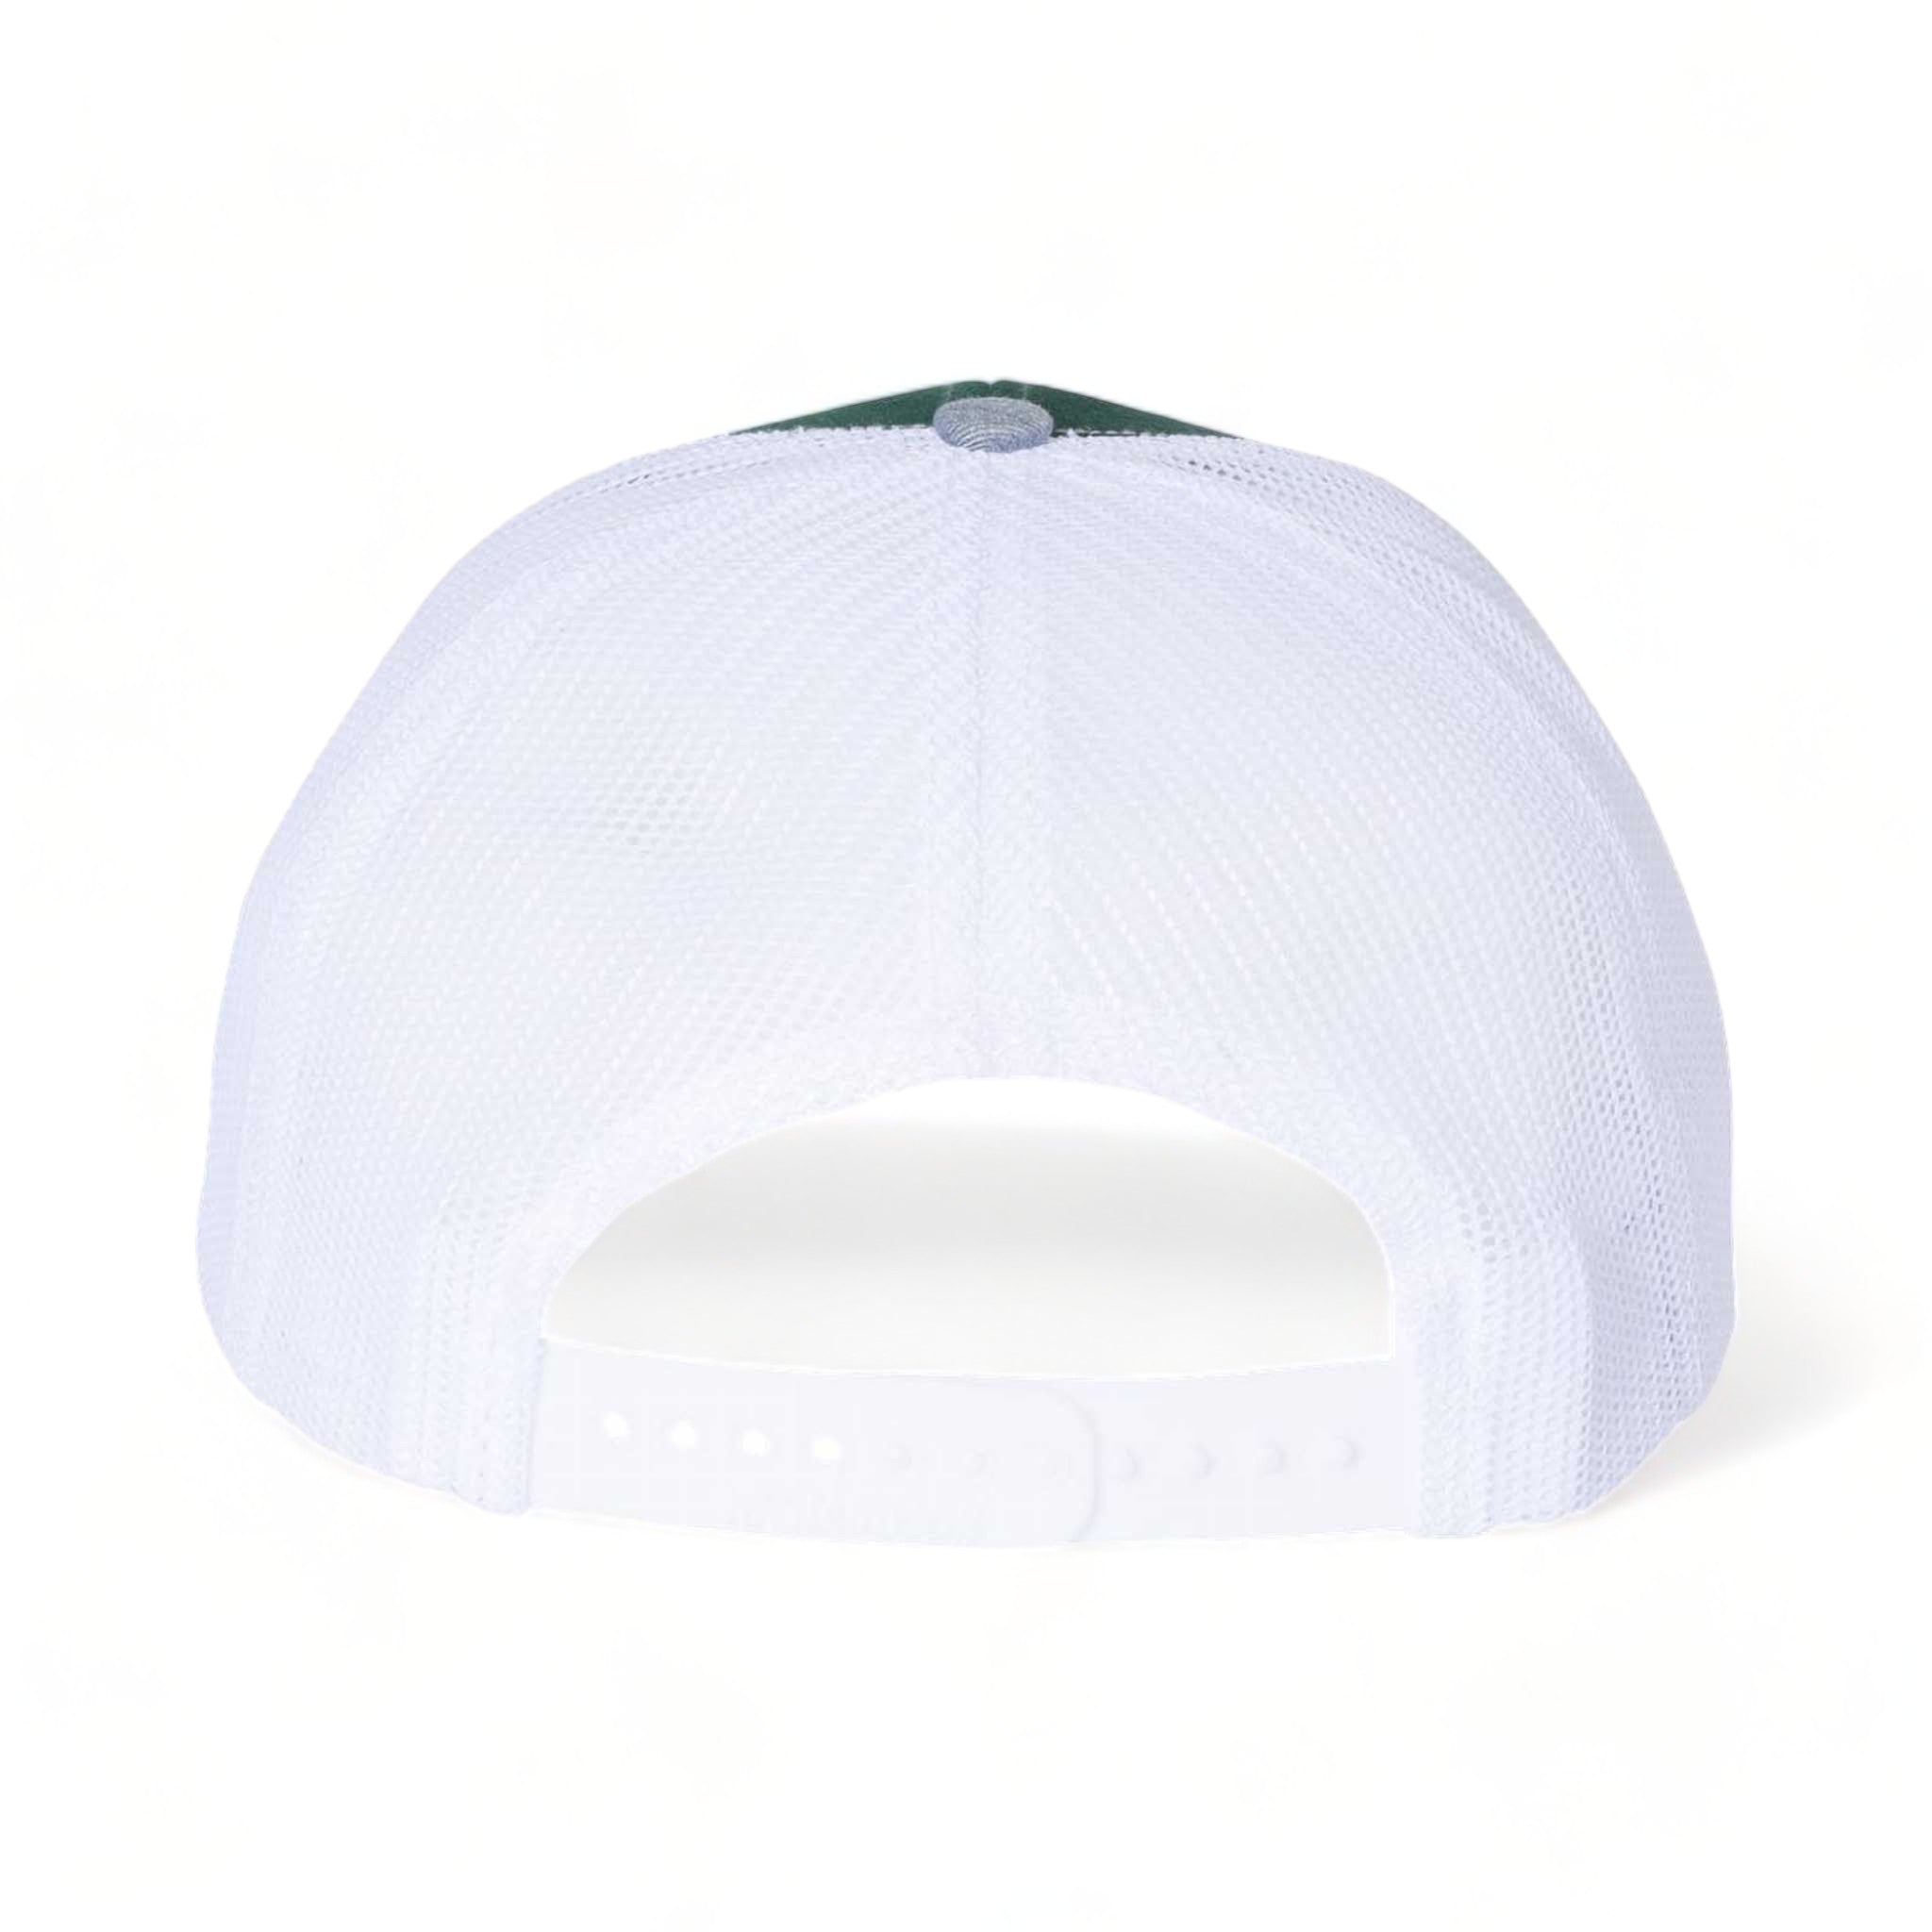 Back view of Richardson 112 custom hat in dark green, white and heather grey